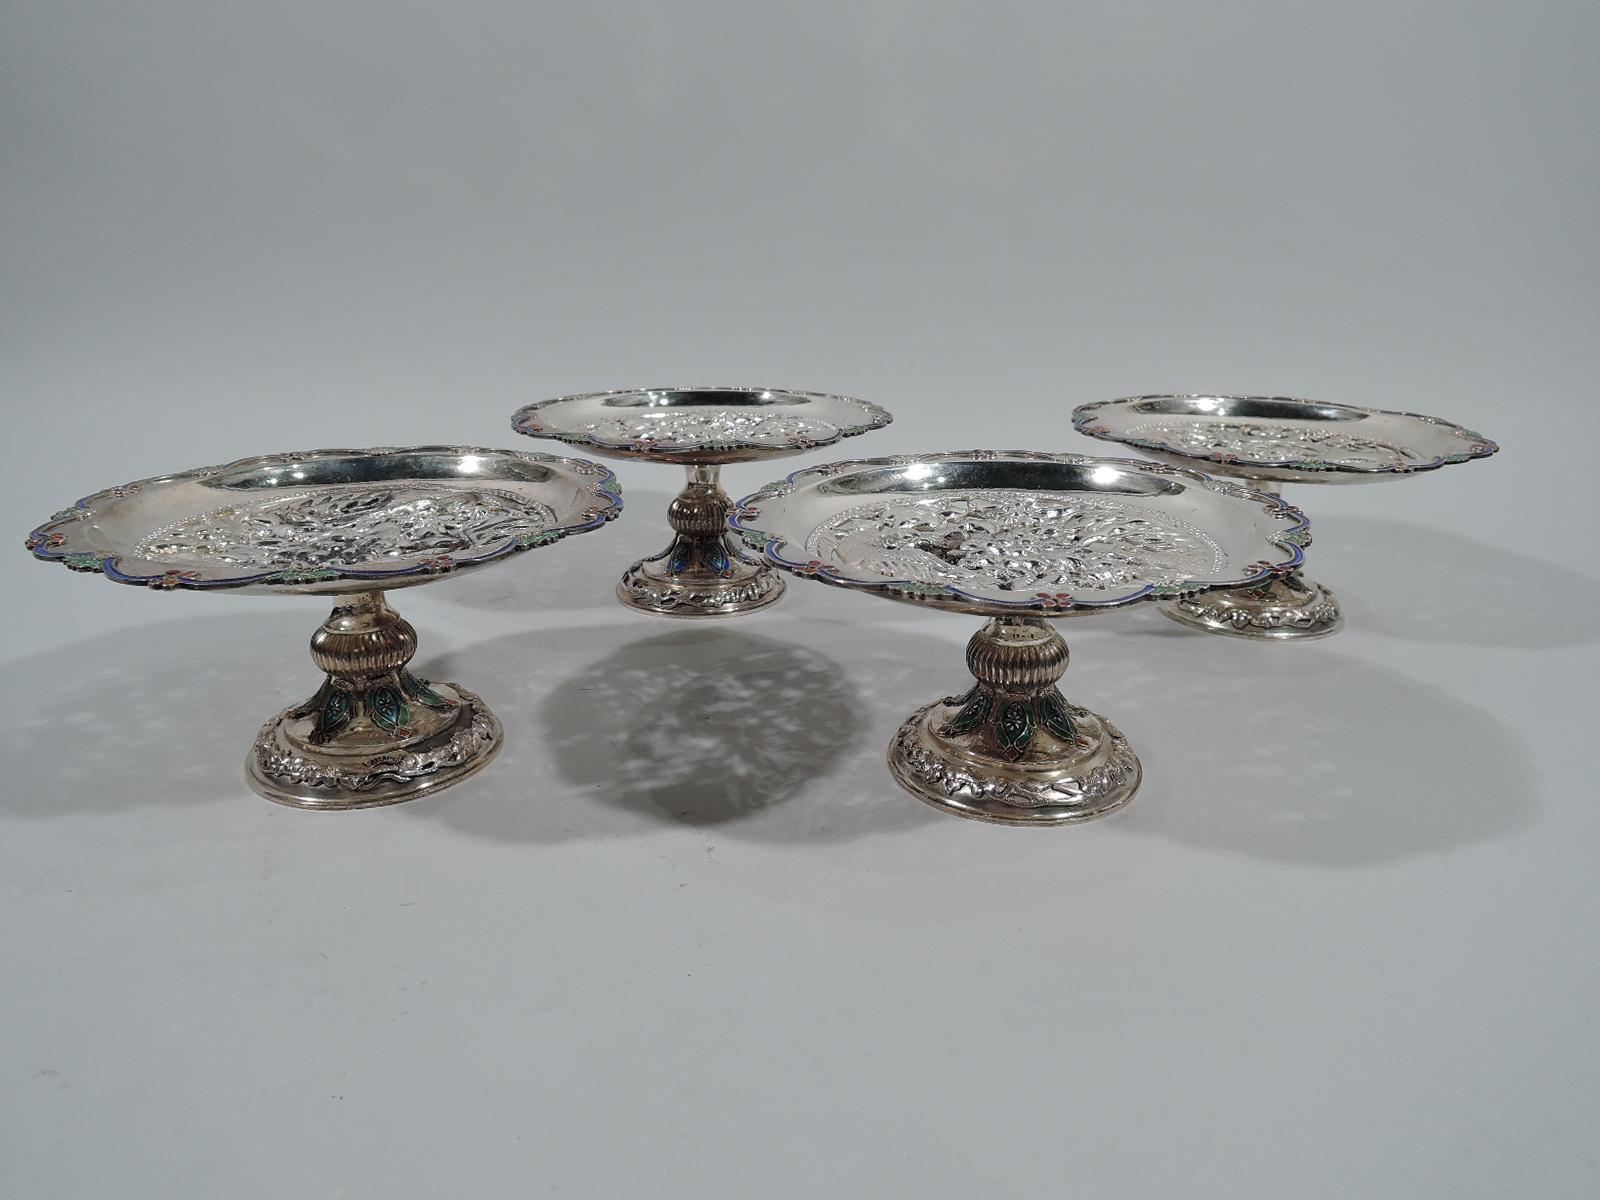 Chinese Export Set of 4 Antique Southeast Asian Silver and Enamel Compotes For Sale